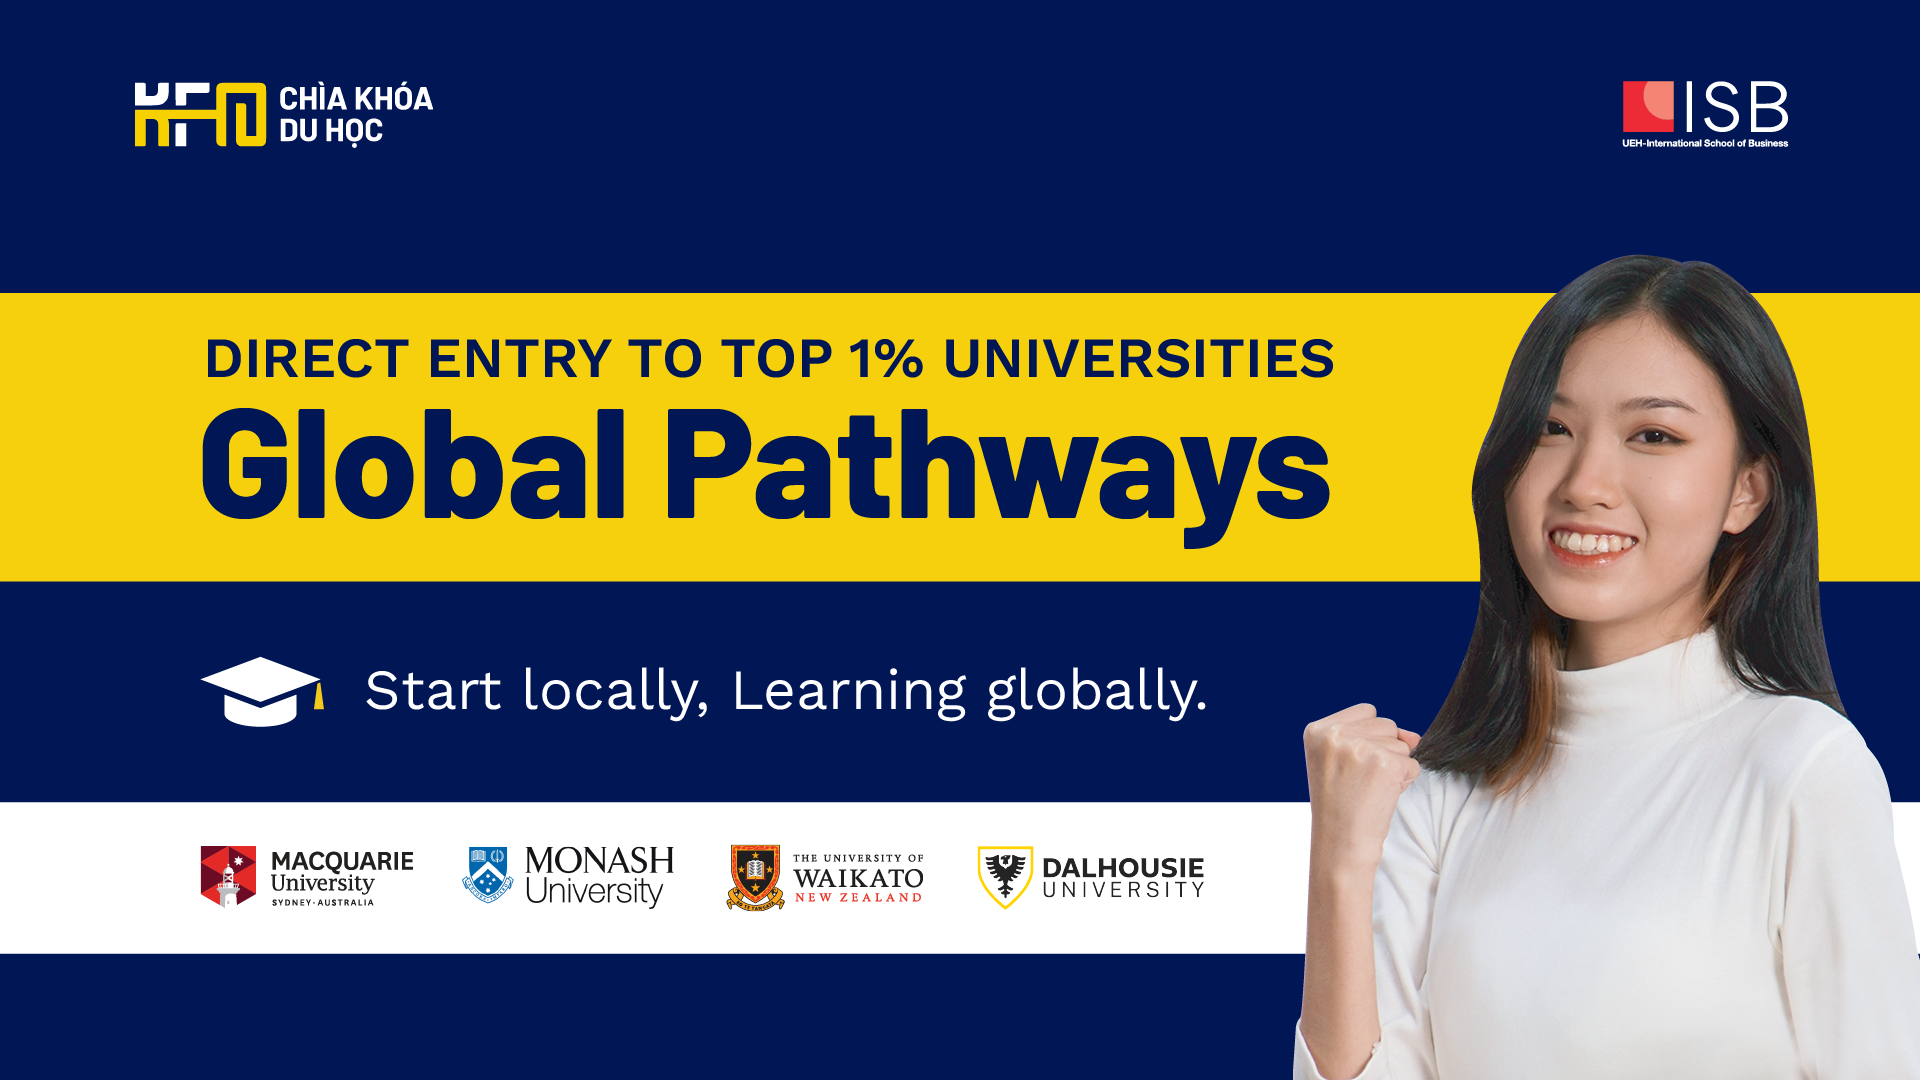 Global Pathways Direct Entry To Top 1% Universities